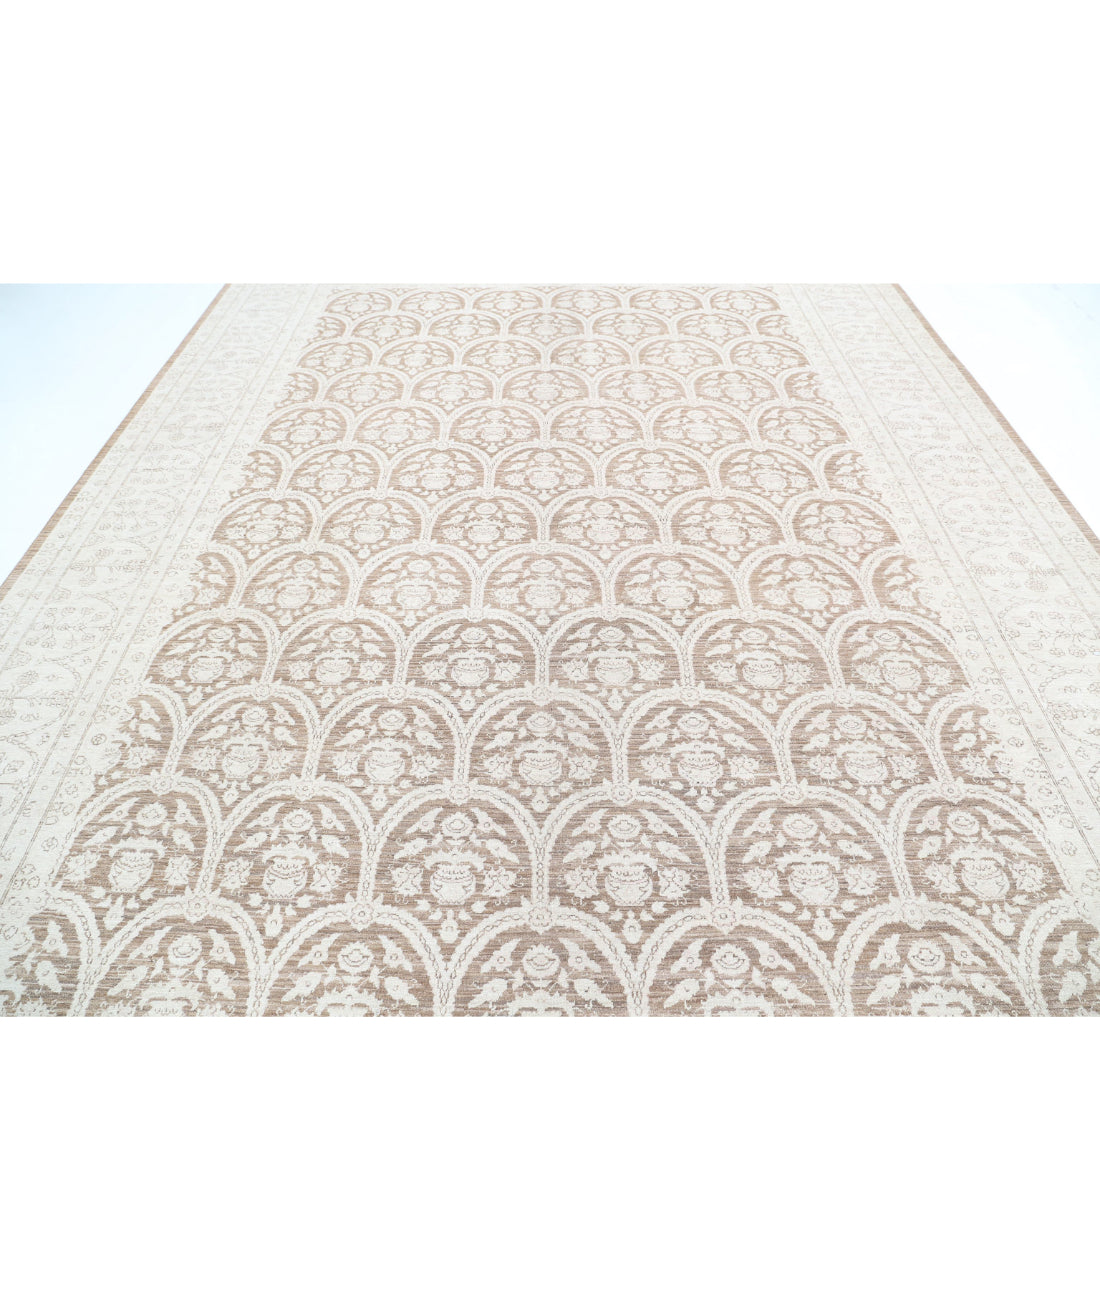 Serenity 10'1'' X 13'4'' Hand-Knotted Wool Rug 10'1'' x 13'4'' (303 X 400) / Brown / Ivory